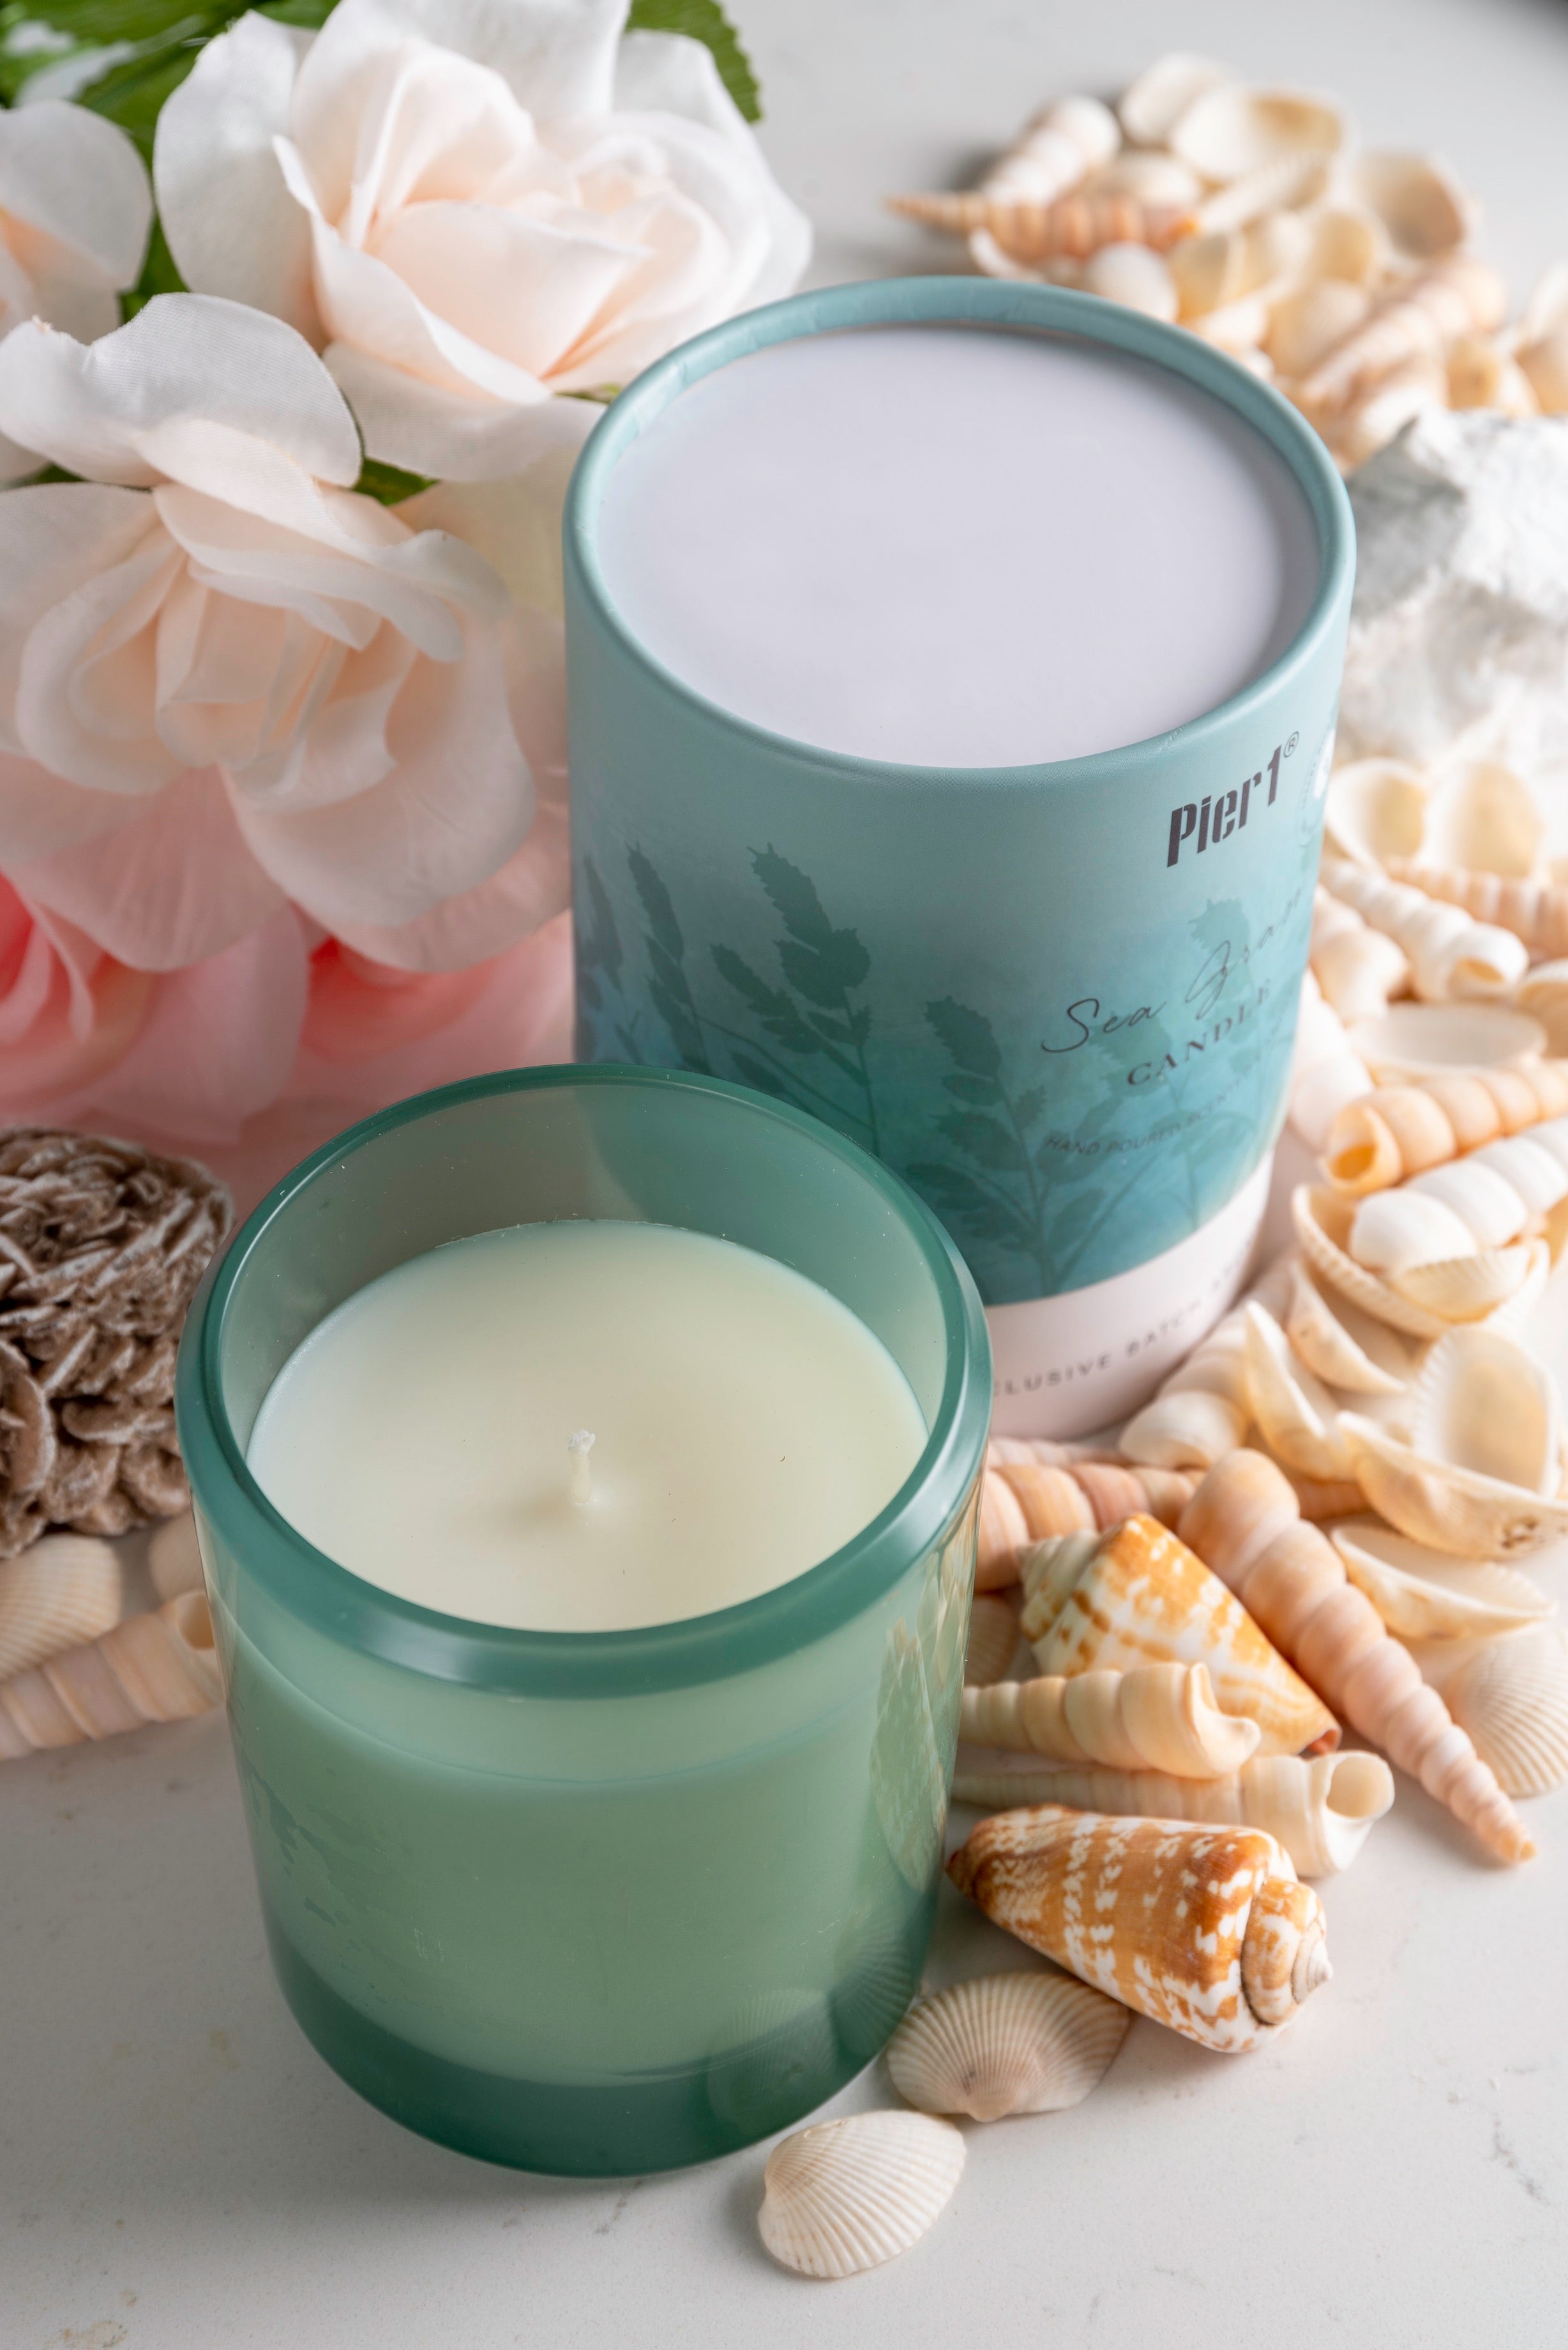 Pier-1-Sea-Grass-8oz-Boxed-Soy-Candle-Candles